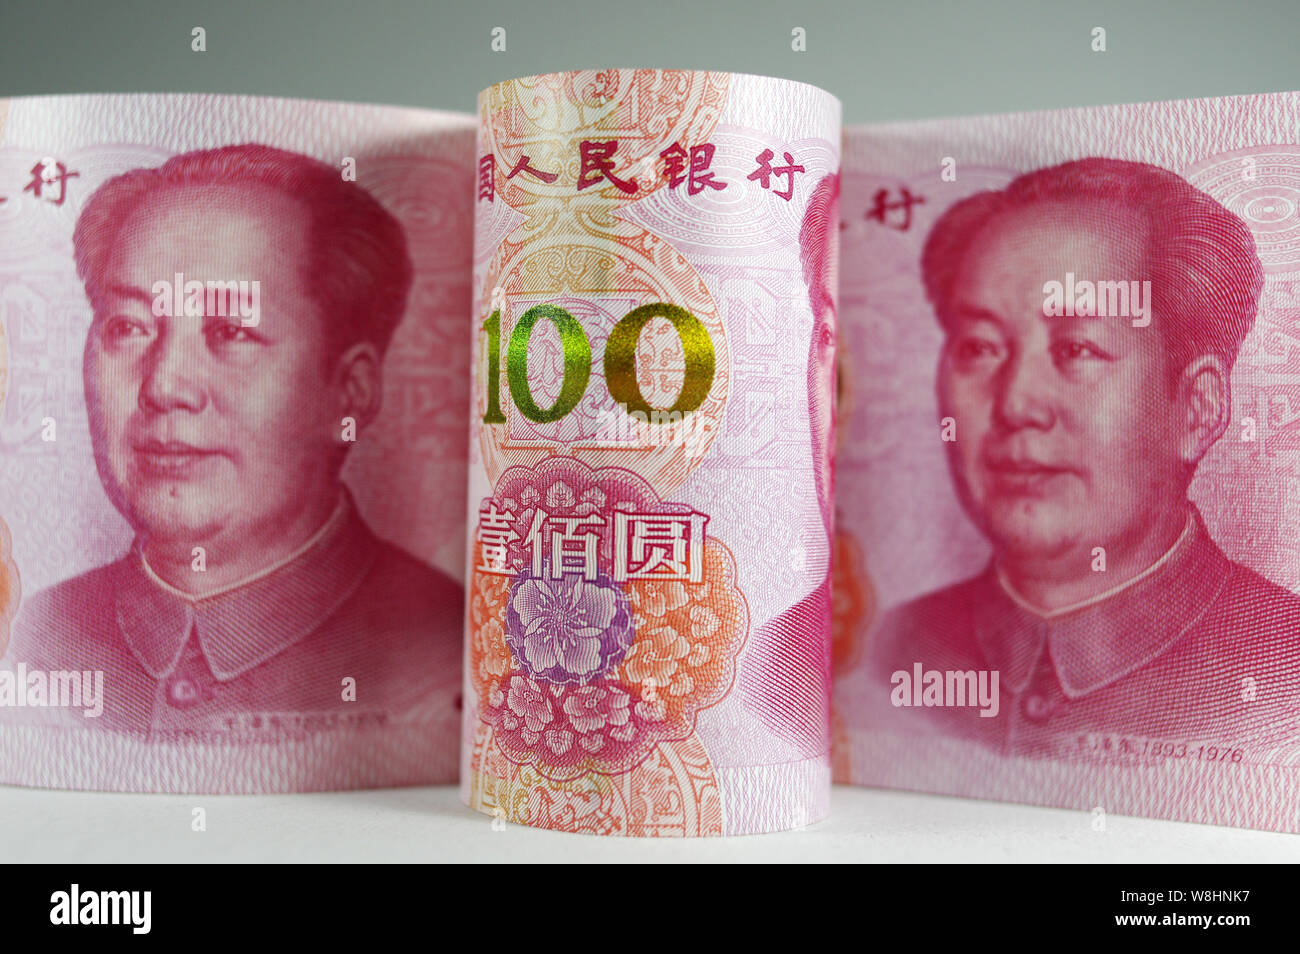 Illustration of RMB (renminbi) yuan banknotes   The International Monetary Fund admitted China's yuan into its elite reserve currency basket on Monday Stock Photo